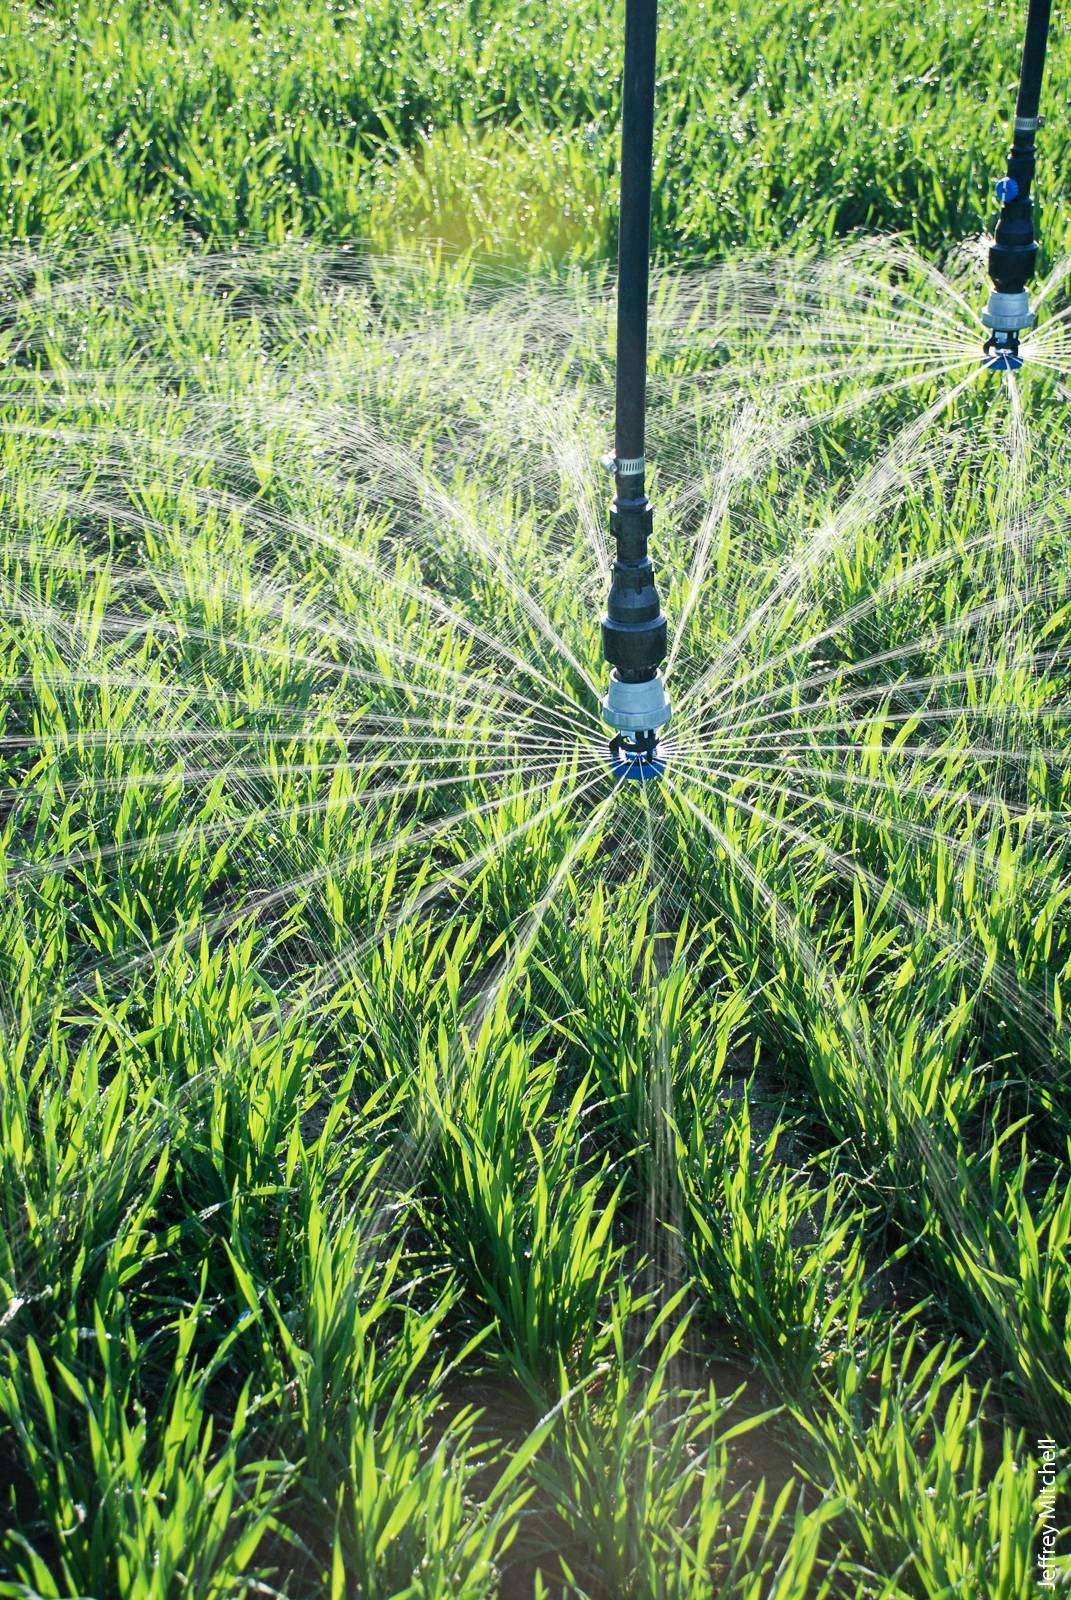 A wheat crop is irrigated in Five Points with a low-elevation spray application system, which has applicators positioned 12 to 18 inches above the ground.